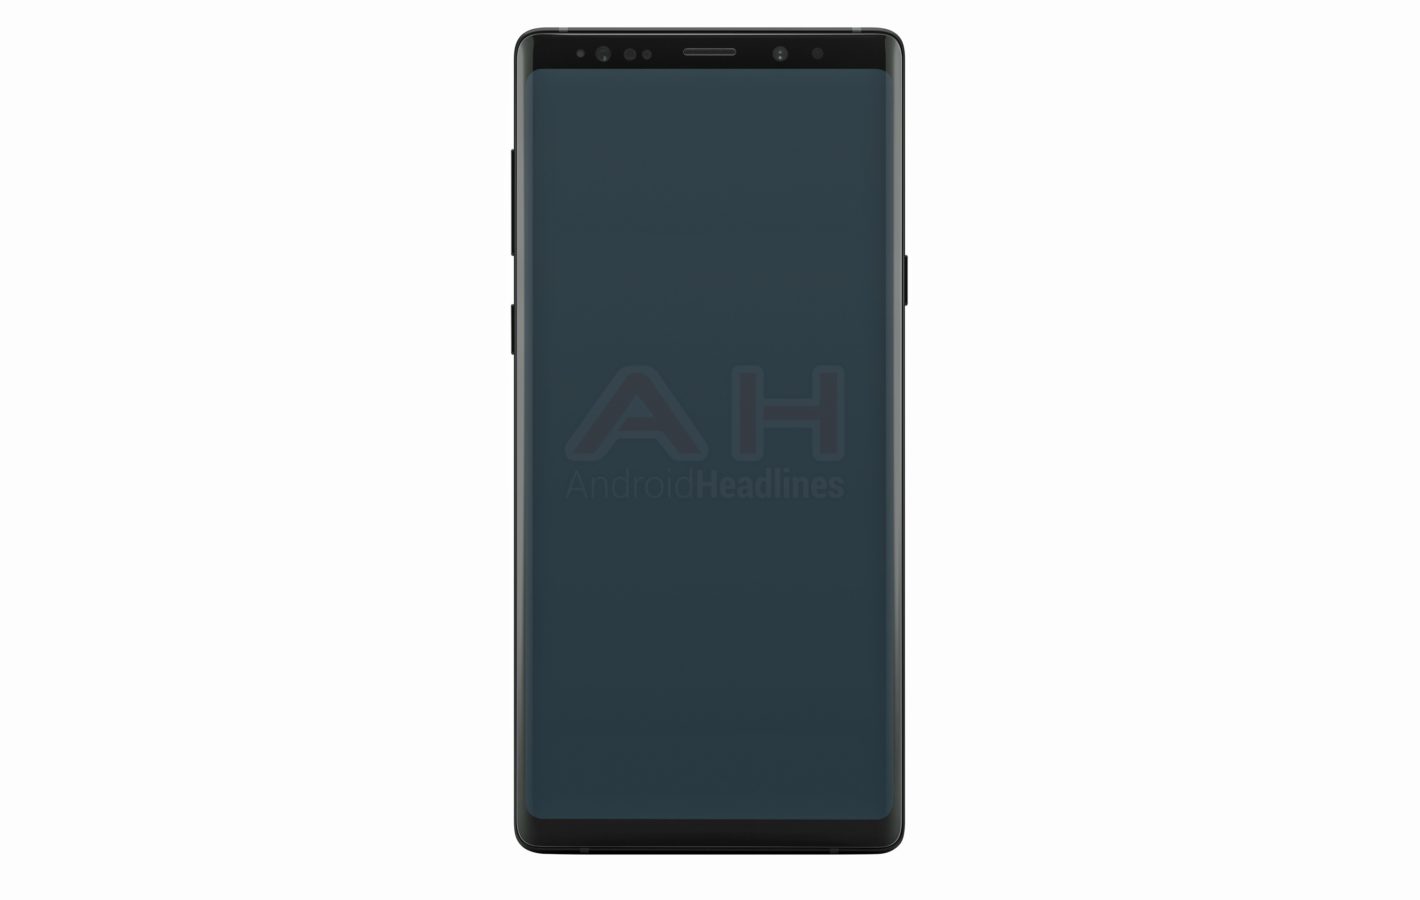 Leaked front panel of Samsung Galaxy Note 9